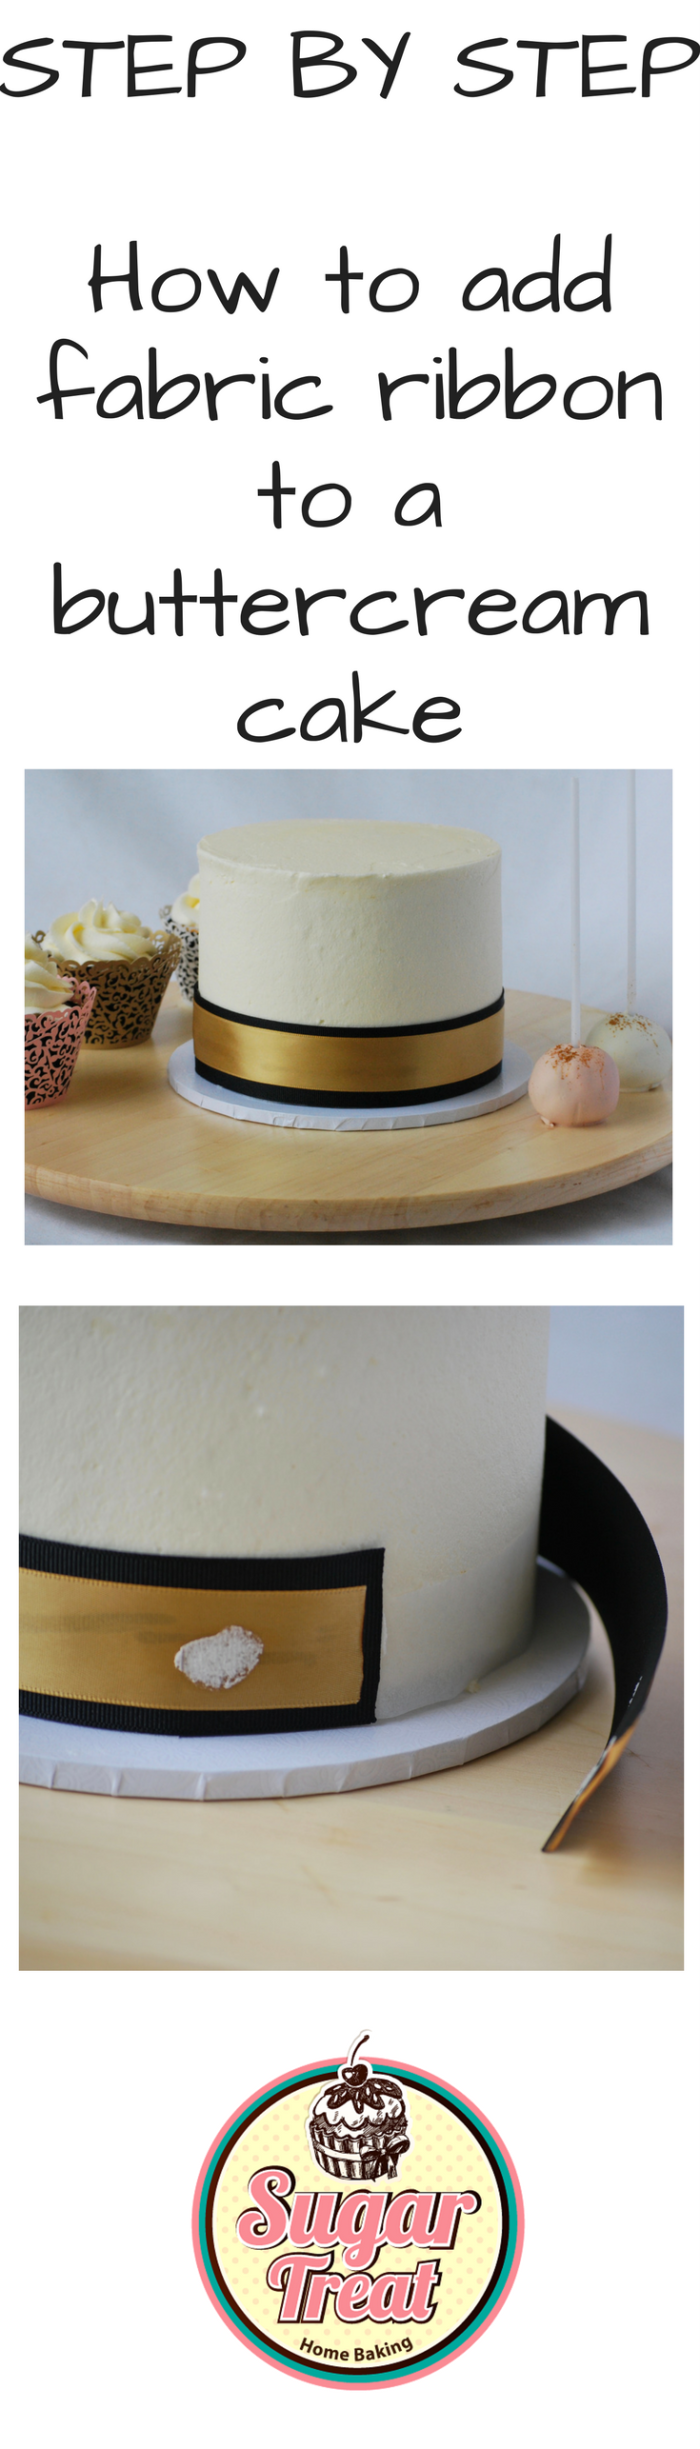 STEP BY STEPHow to add fabric ribbon to a buttercream cake.png